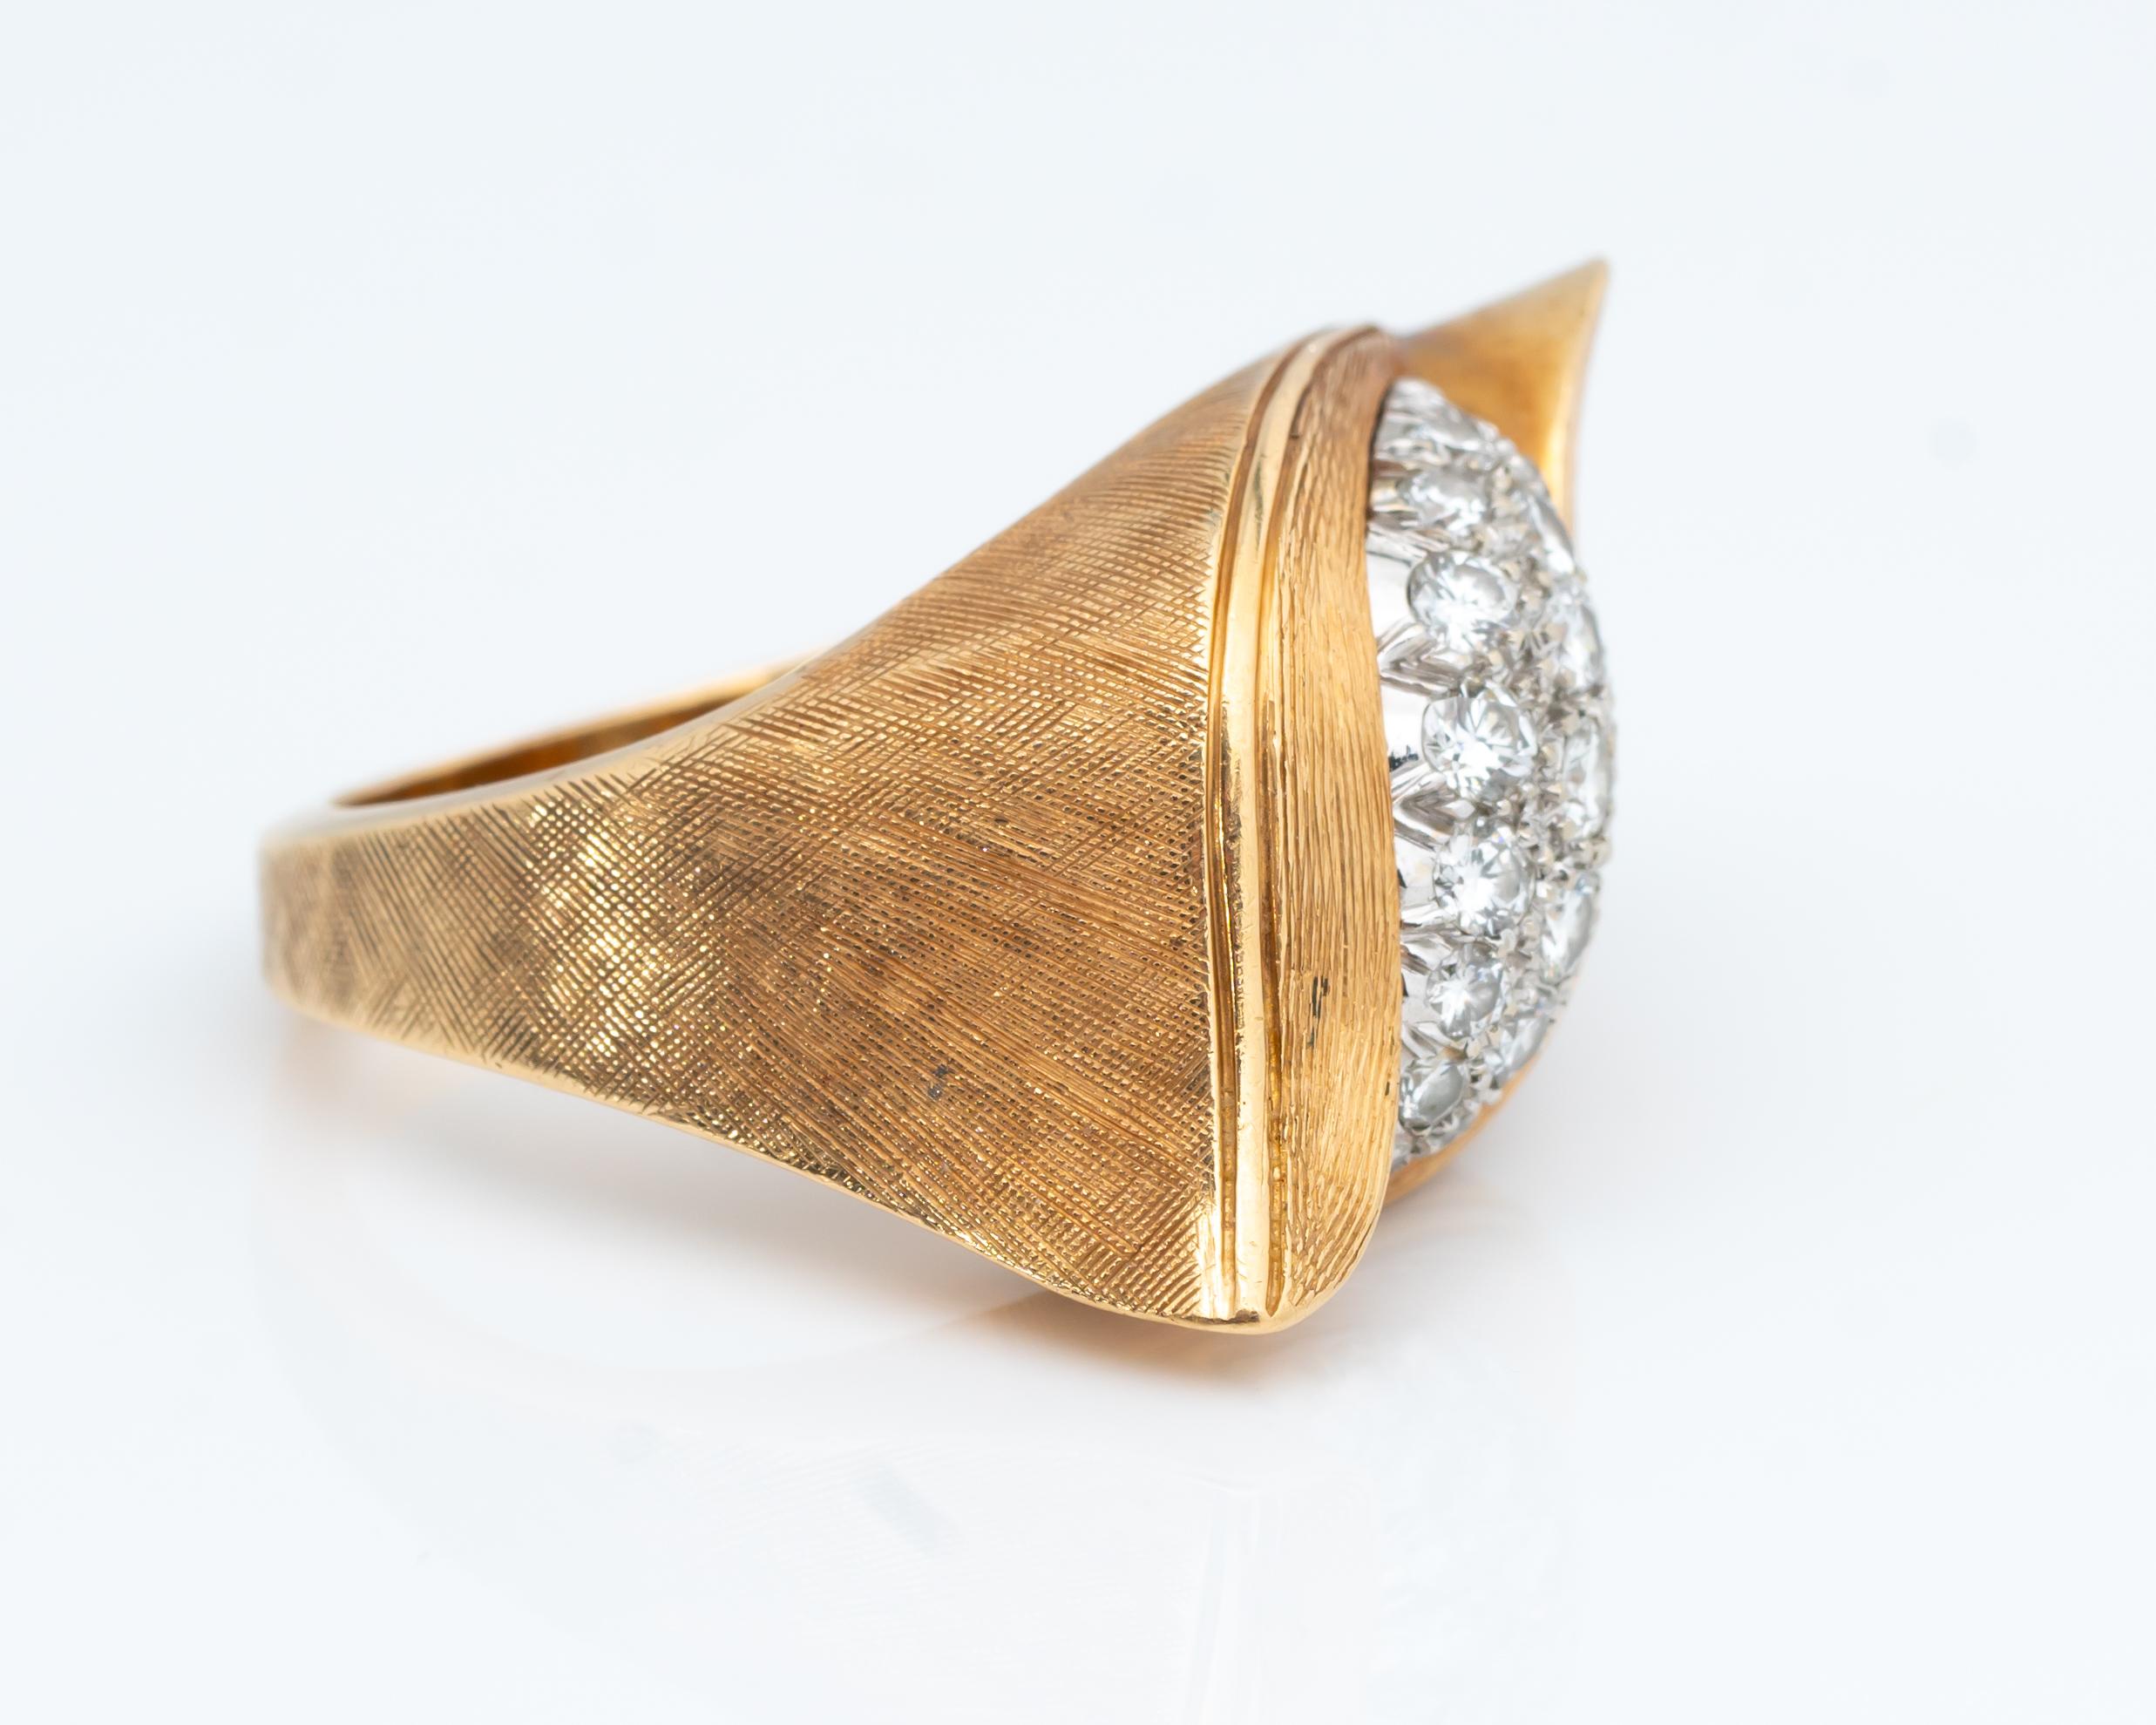 Beautifully crafted swoop ring featuring diamonds and 14 karat yellow gold. The gold has a unique minimal textured appearance and feel to it, giving the ring a very chic finish! The top view has a 